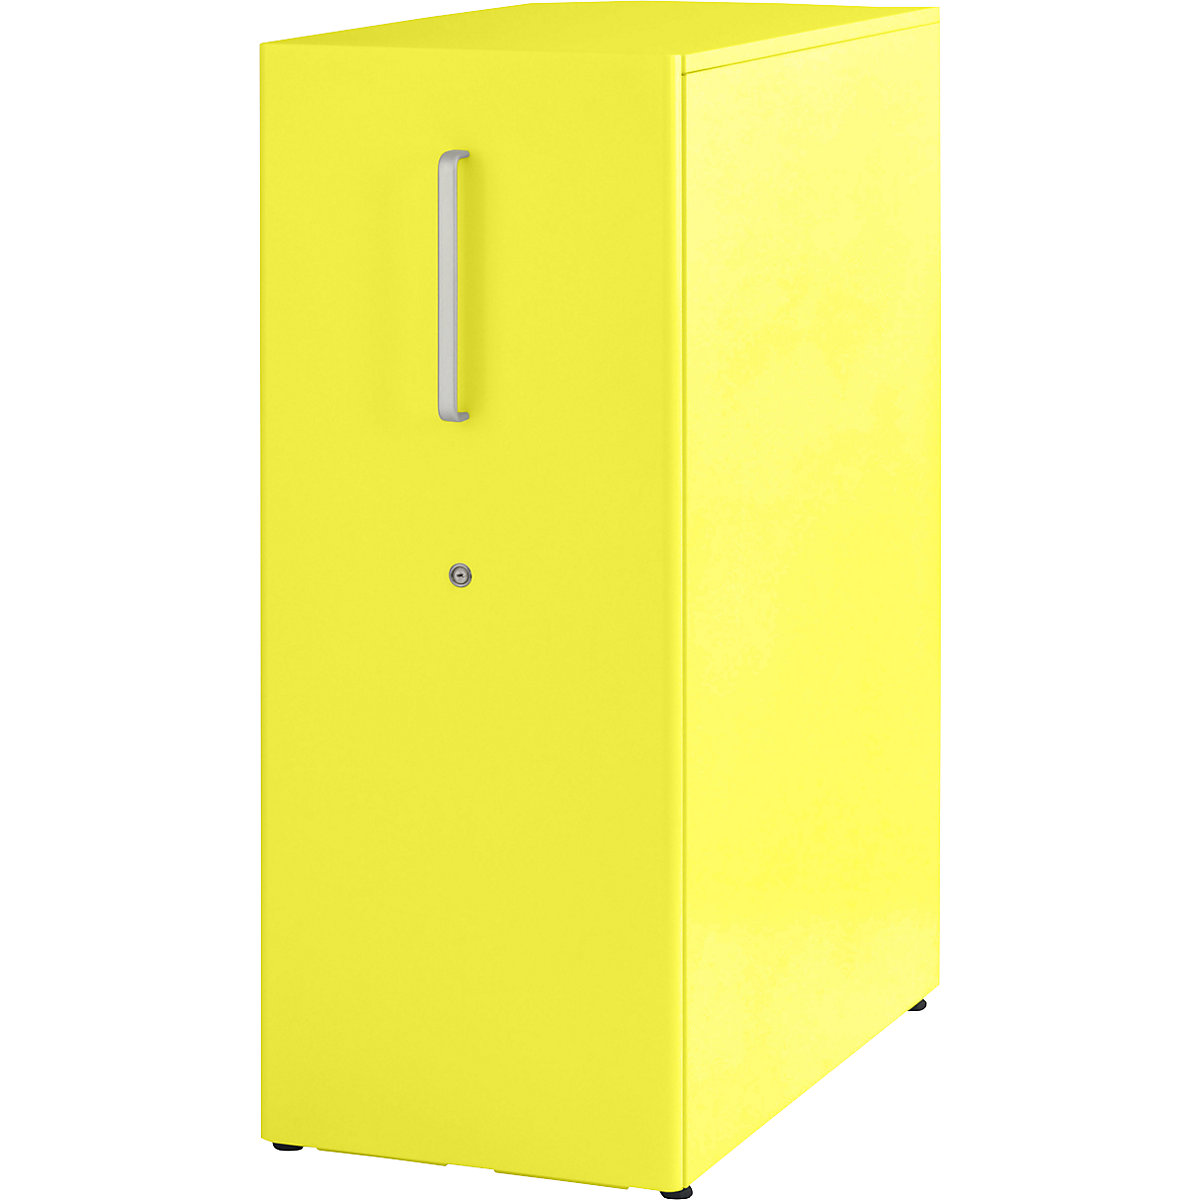 Tower™ 3 add-on furniture, with worktop – BISLEY, for the right side, 2 shelves, zinc yellow-19